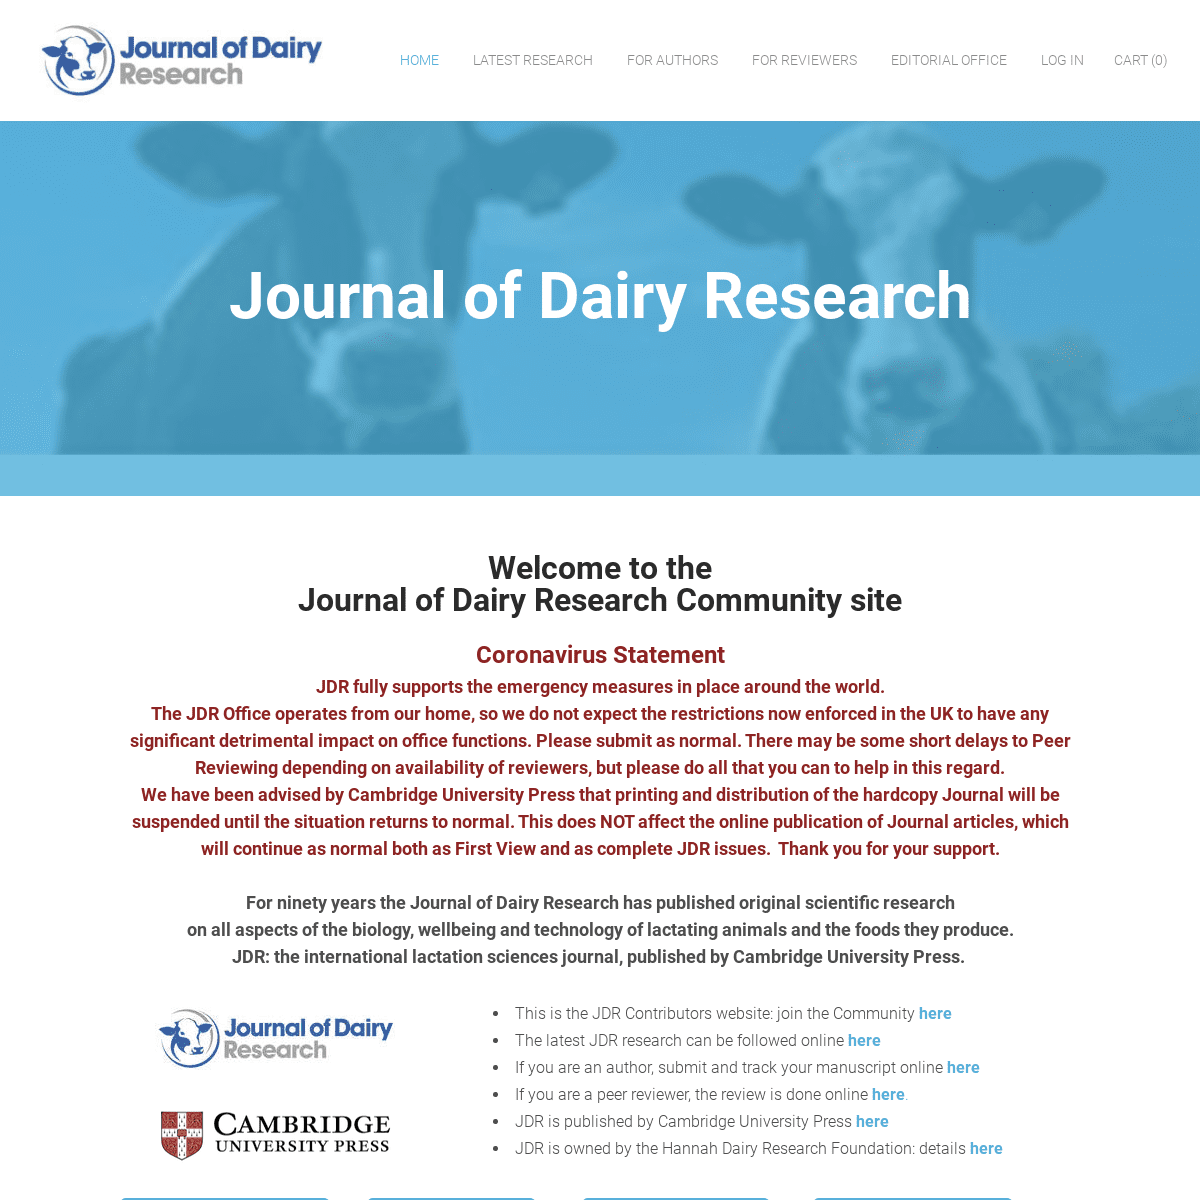 A complete backup of journalofdairyresearch.org